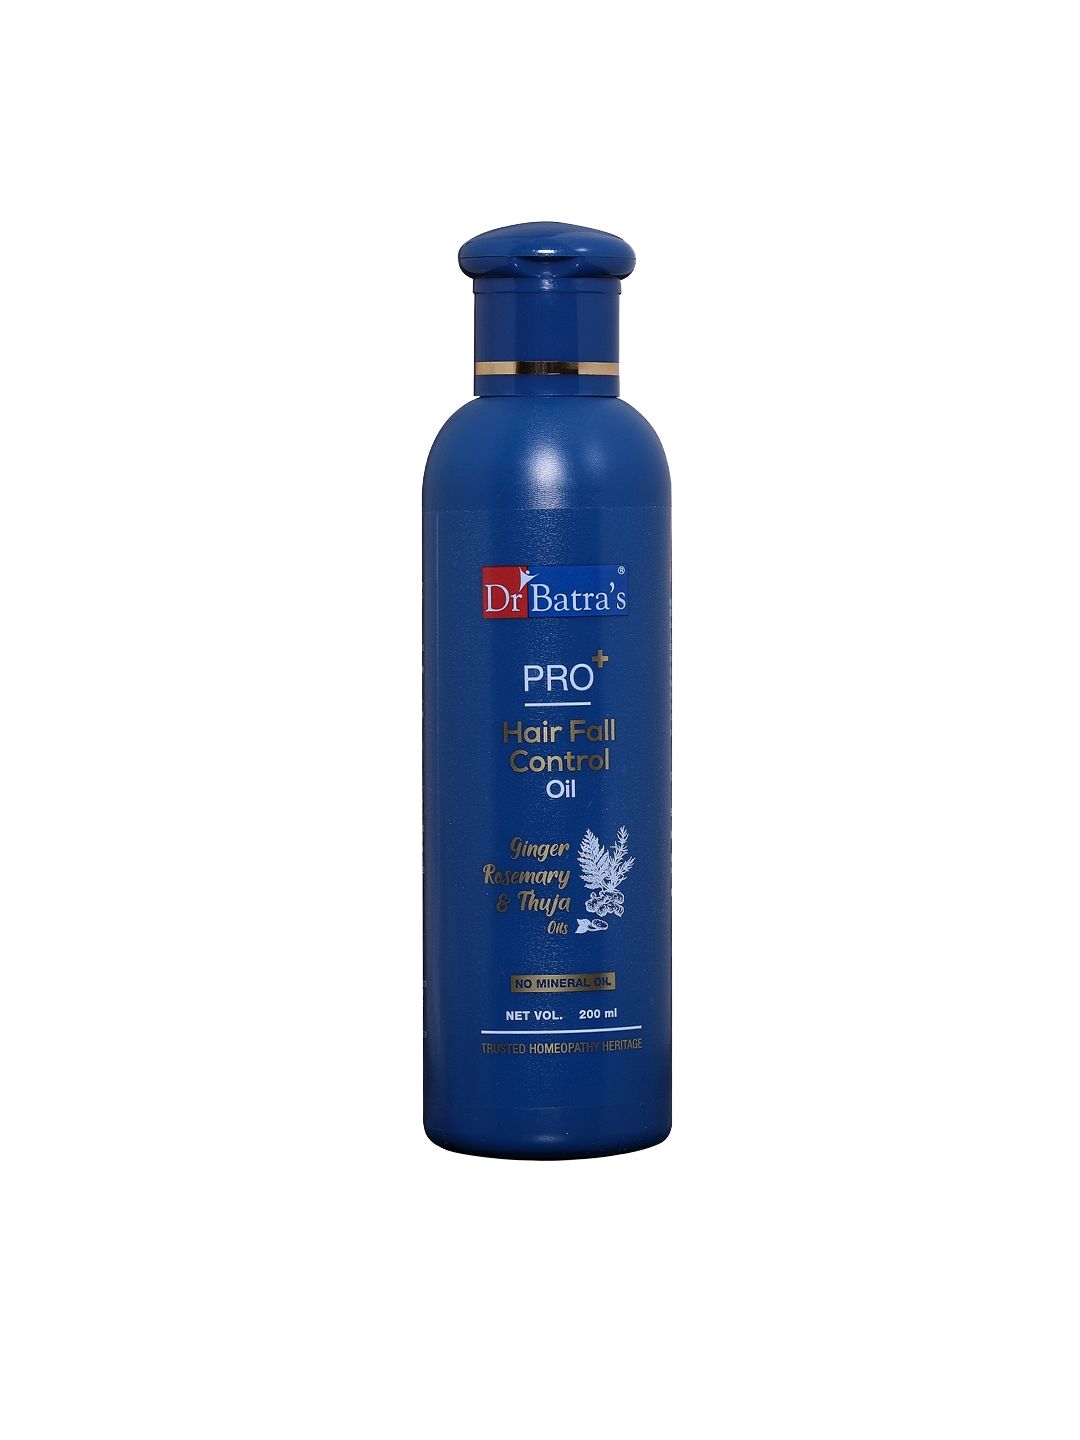 Dr. Batras PRO+ Hair Fall Control Oil Price in India